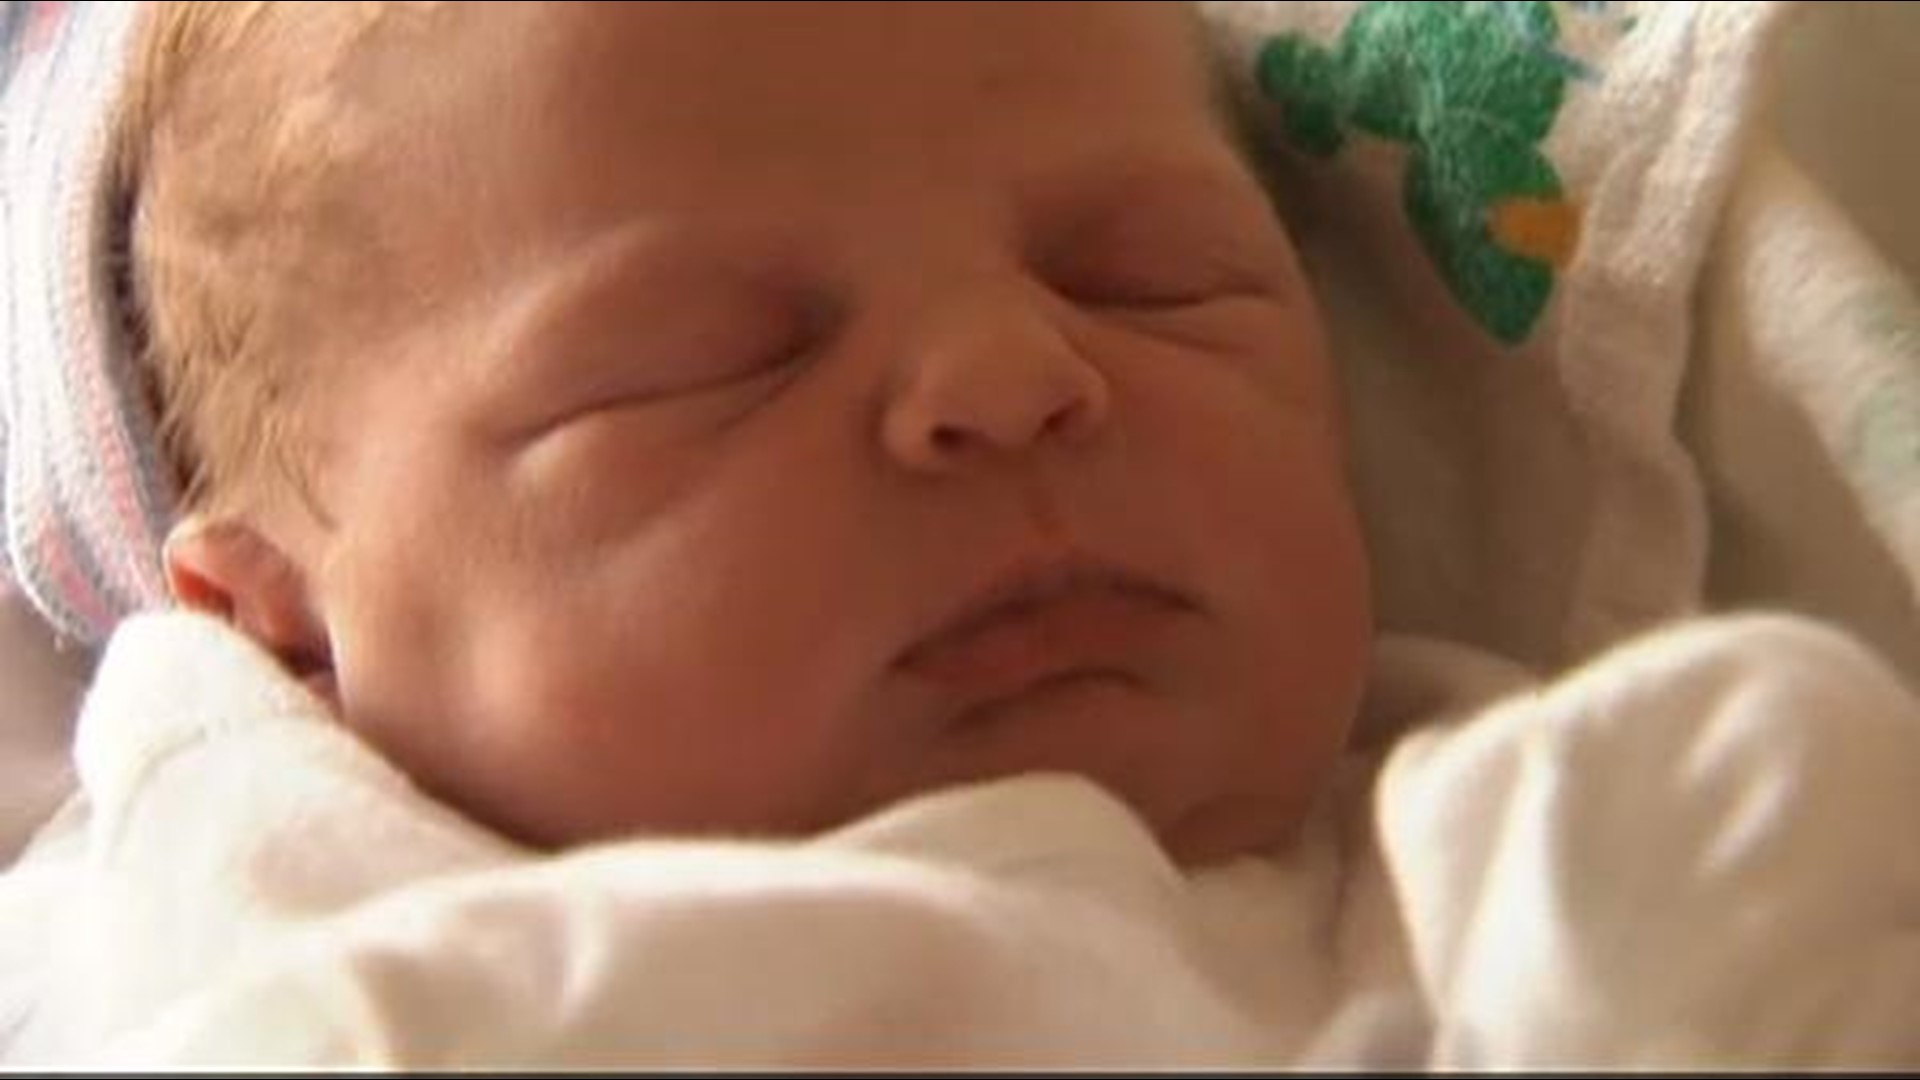 Woman Gives Birth In Car After Being Pulled Over For Speeding